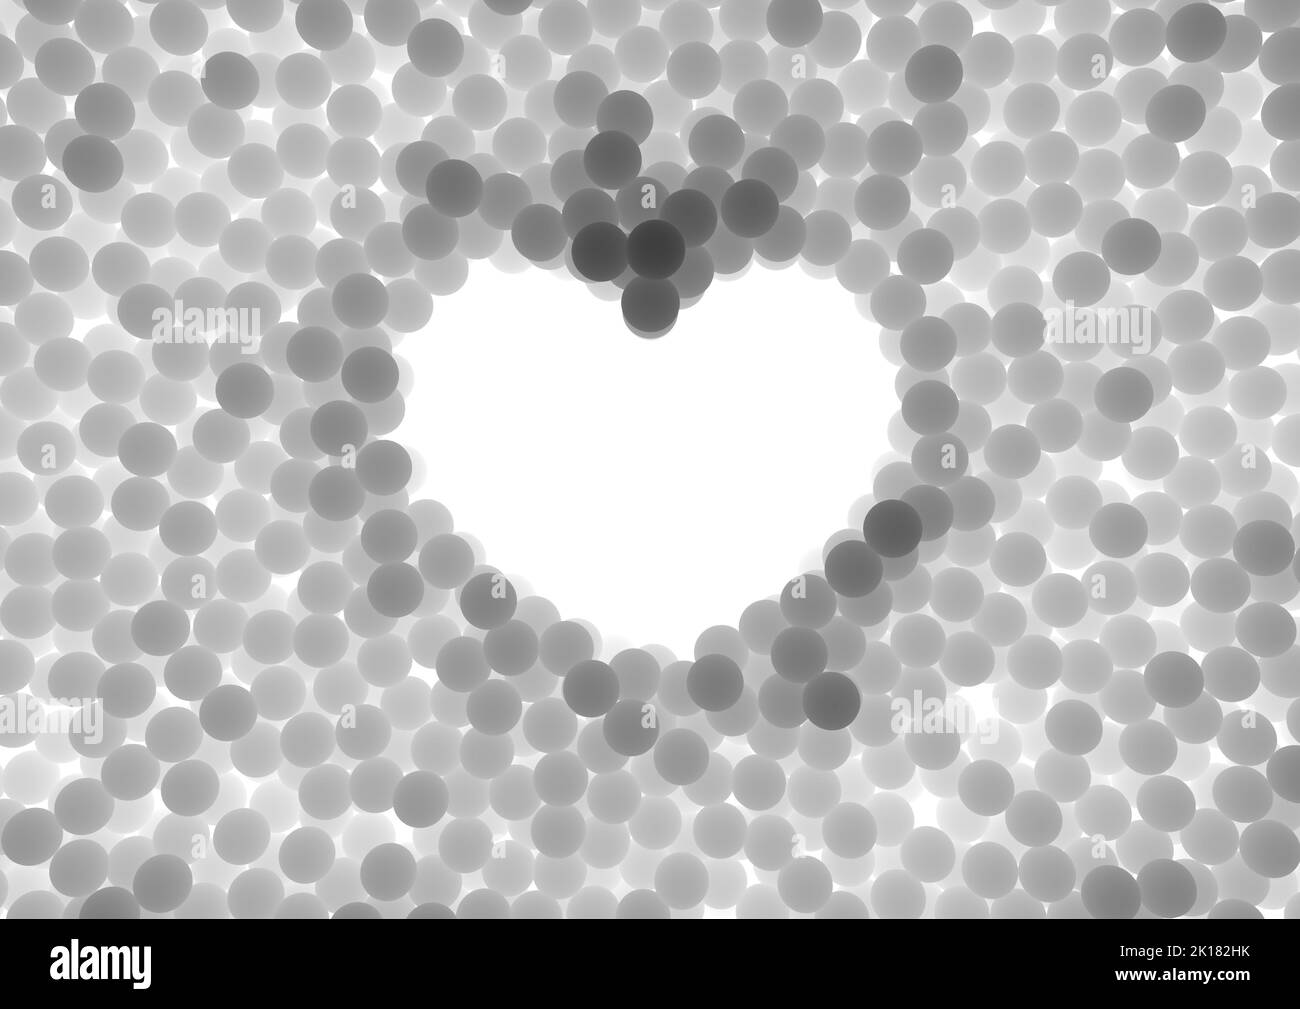 A heart shaped void surrounded by an array of translucent white rubber balls spread out to form a solid background - 3D render Stock Photo